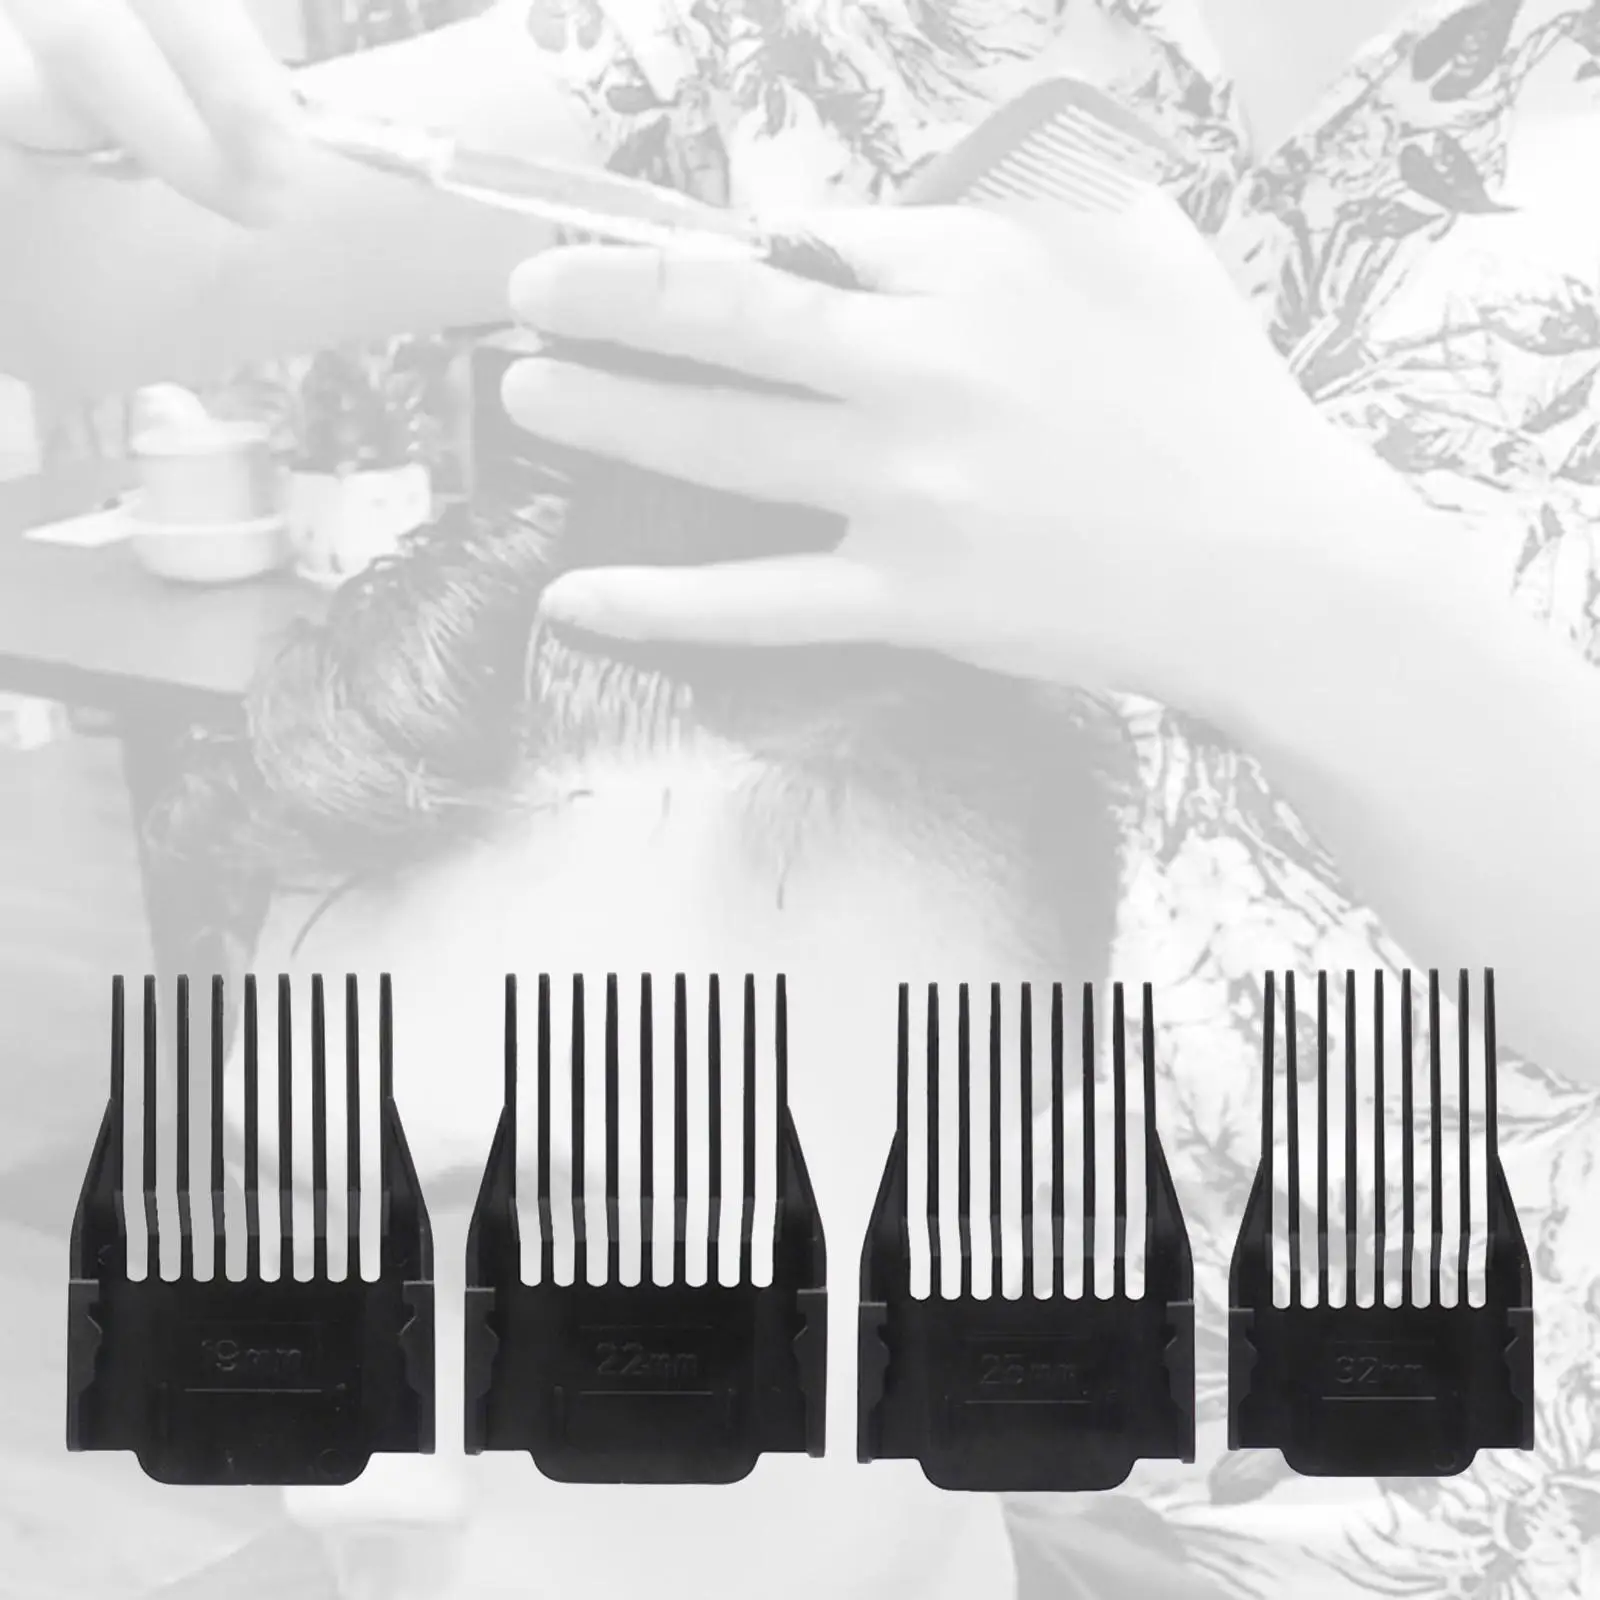 4Pcs Hair Trimmer Guard Combs Universal for Most Size Hair Clippers/Trimmers